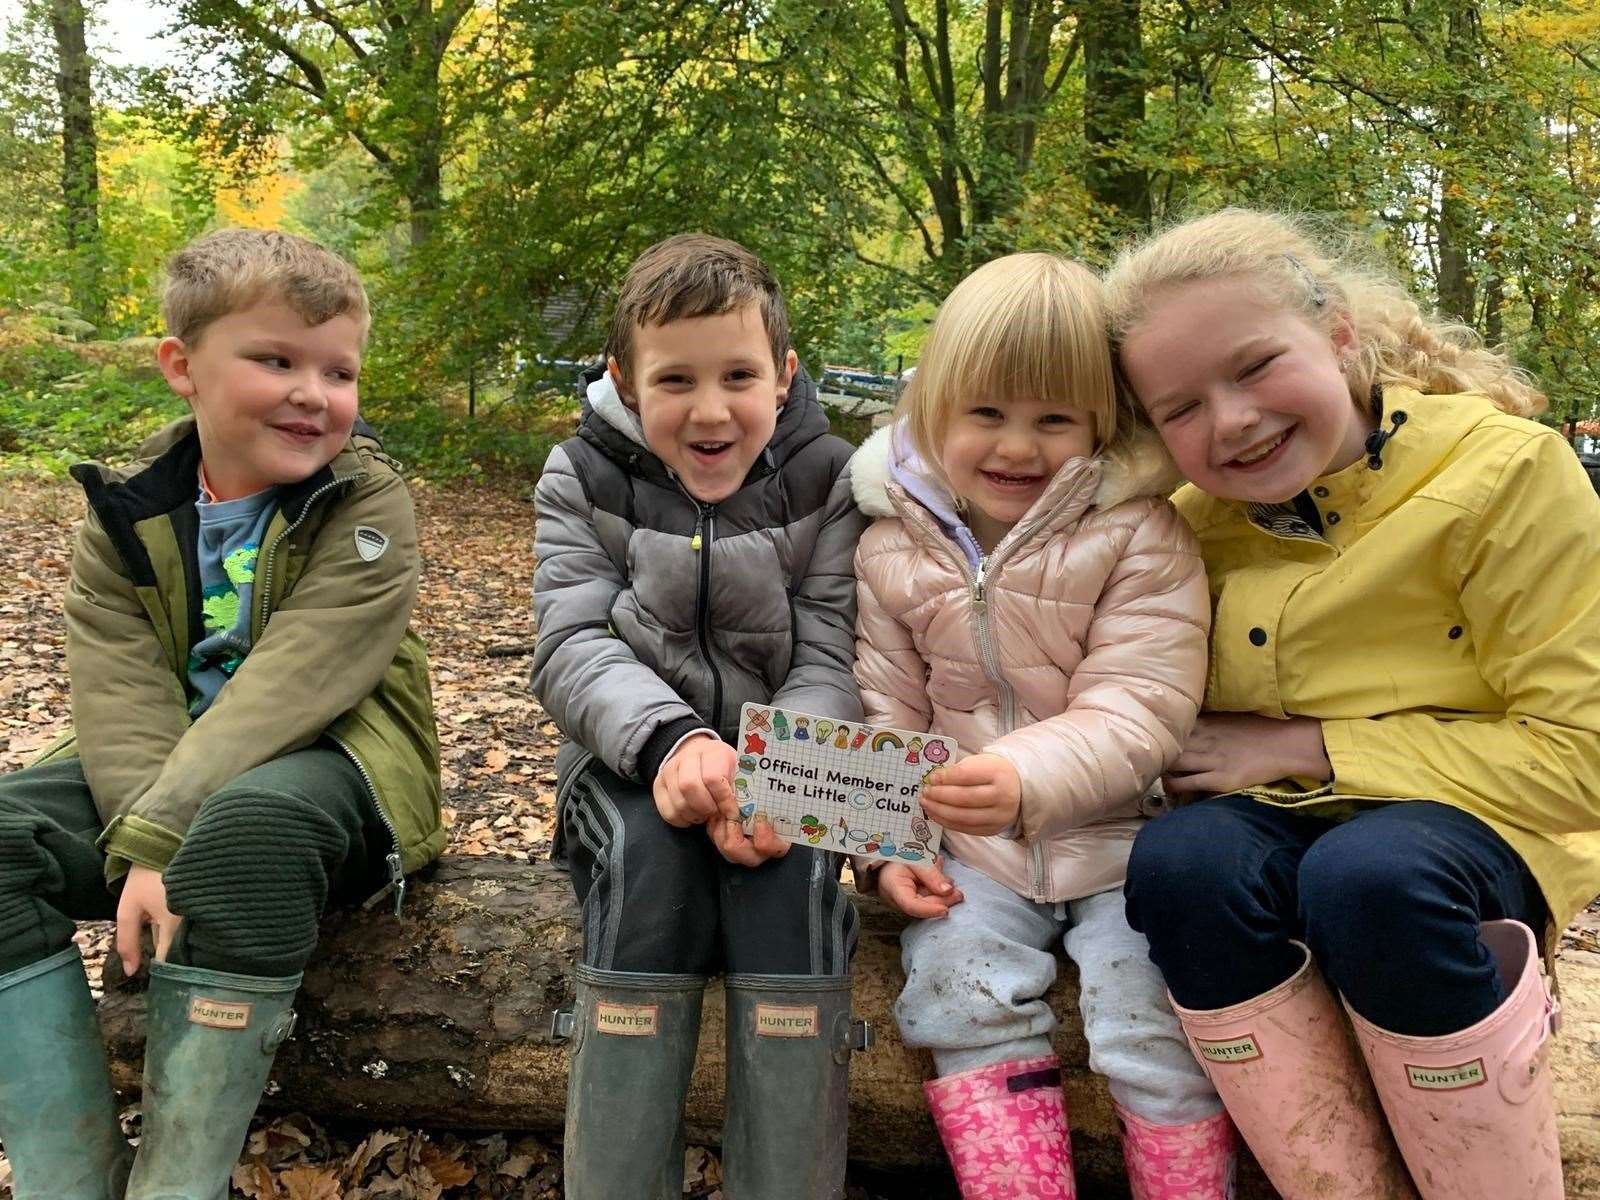 Nic and Jen's children as signed up members of the Little C Club holding the cards their mums created. From left to right: Albie, 5, Dylan, 5, Poppy, 3 and Eliza, 9